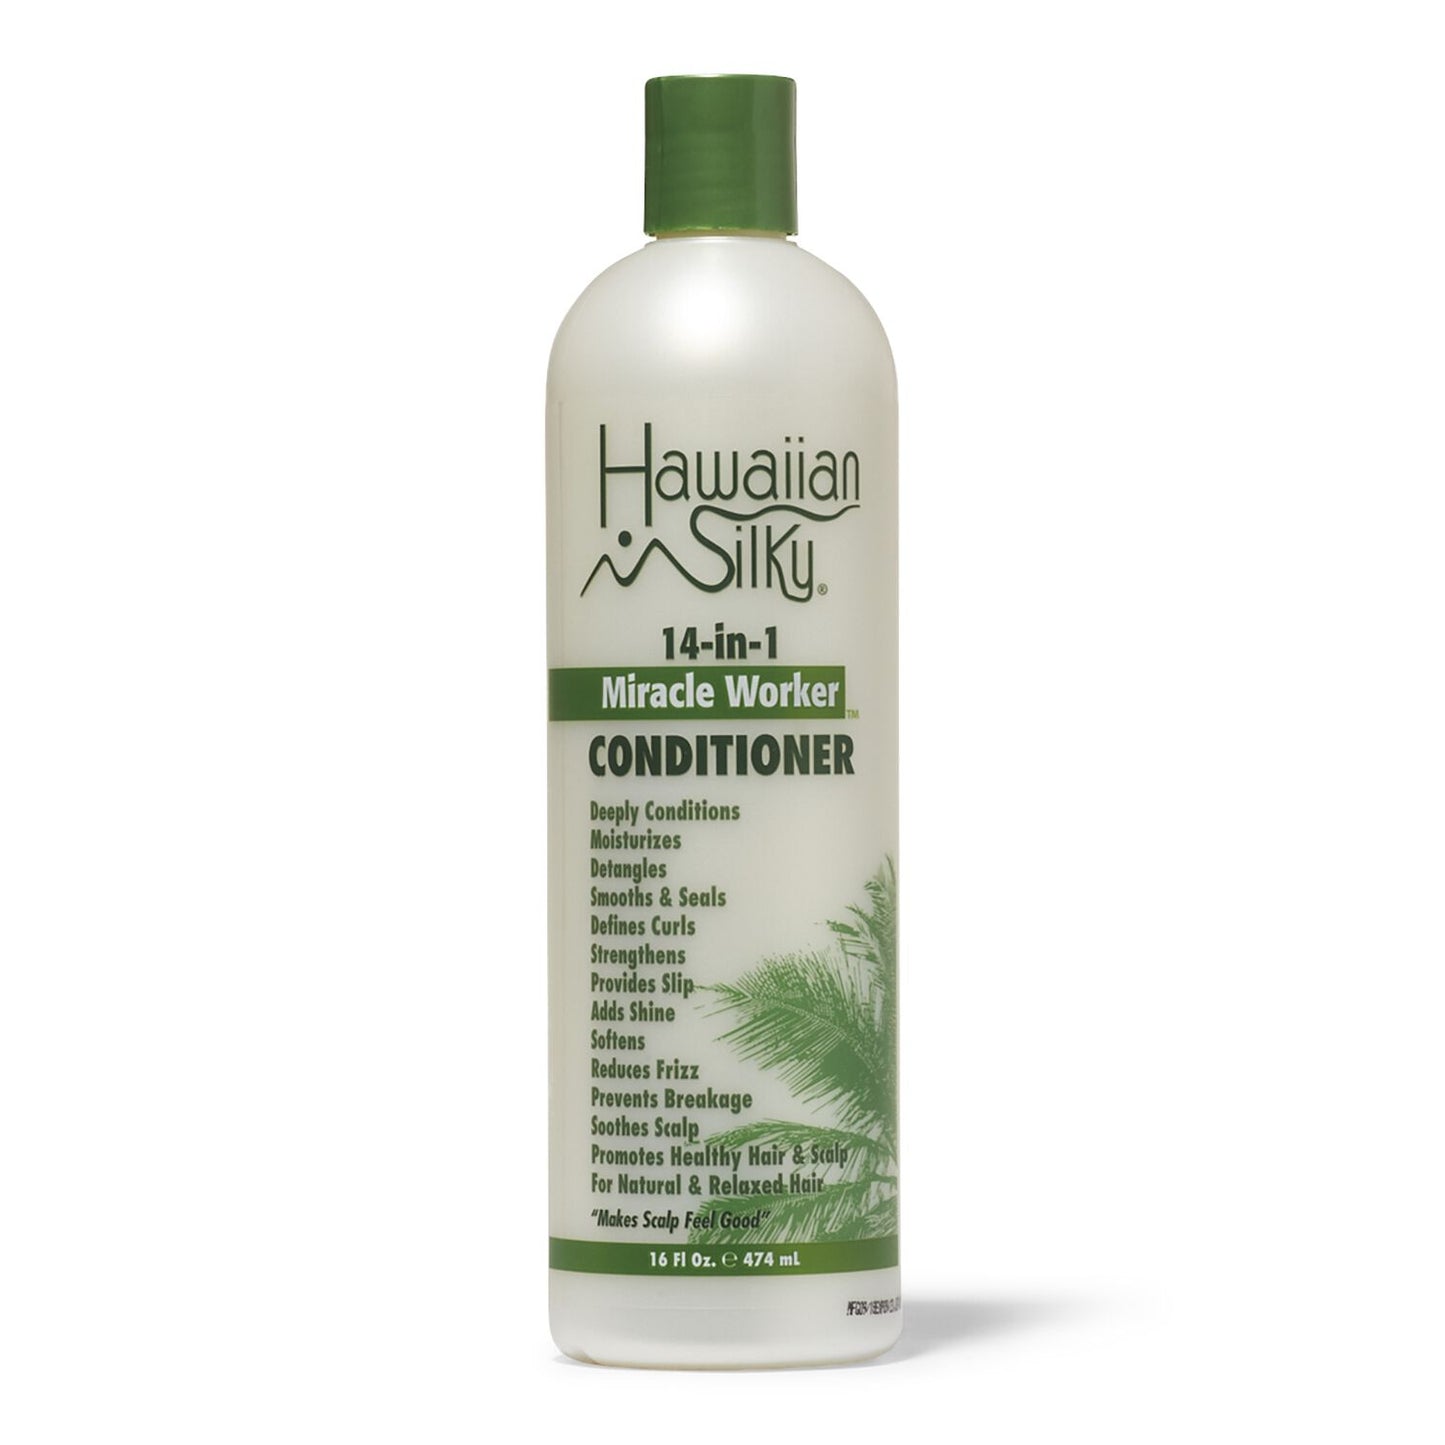 Hawaiian Silky 14-in-1 Miracle Worker Conditioner